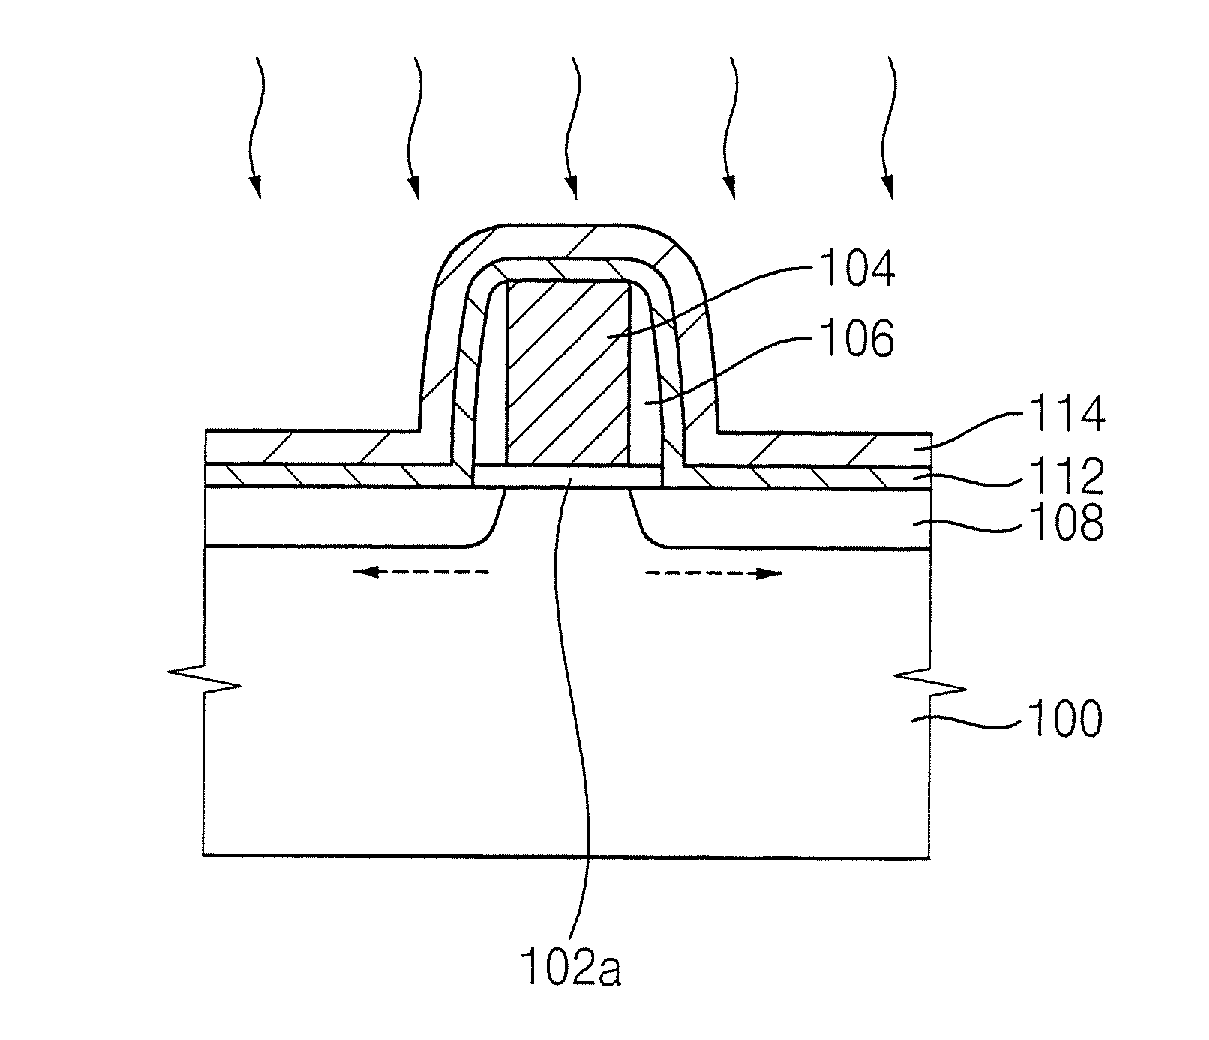 Methods of manufacturing mos transistors with strained channel regions